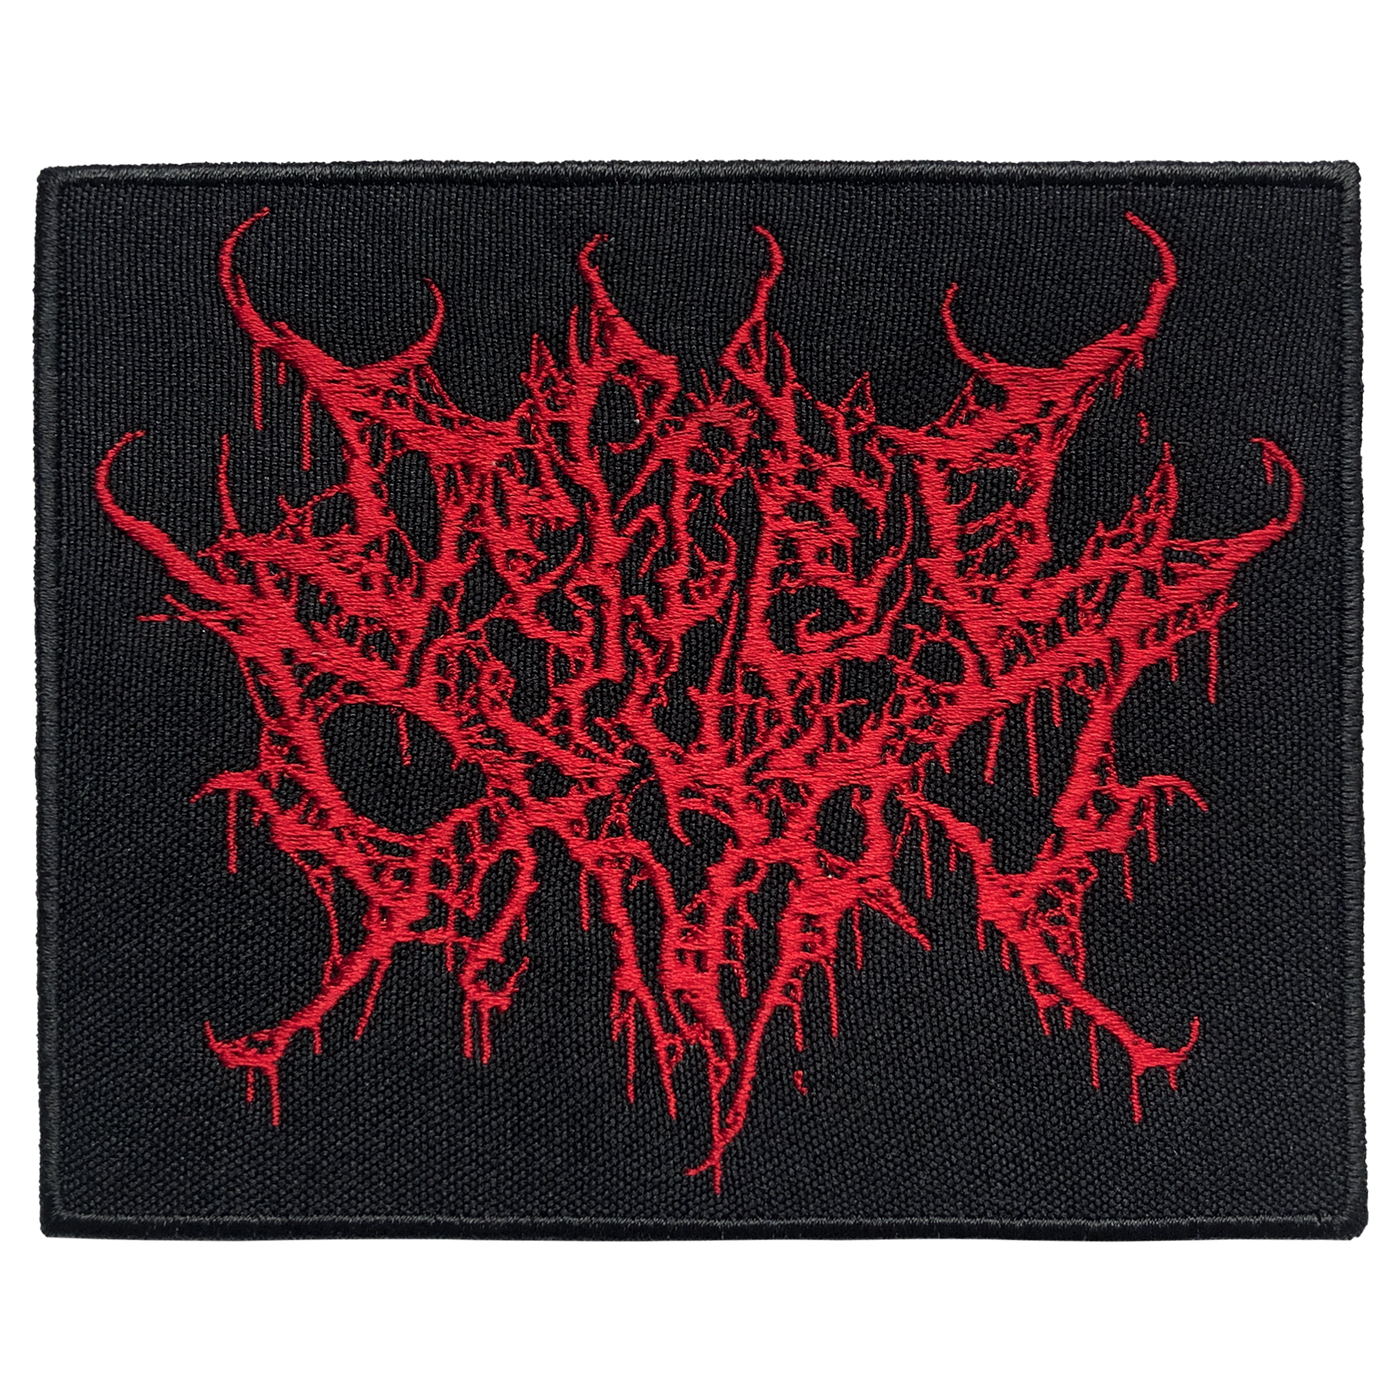 Defiled Crypt Patches